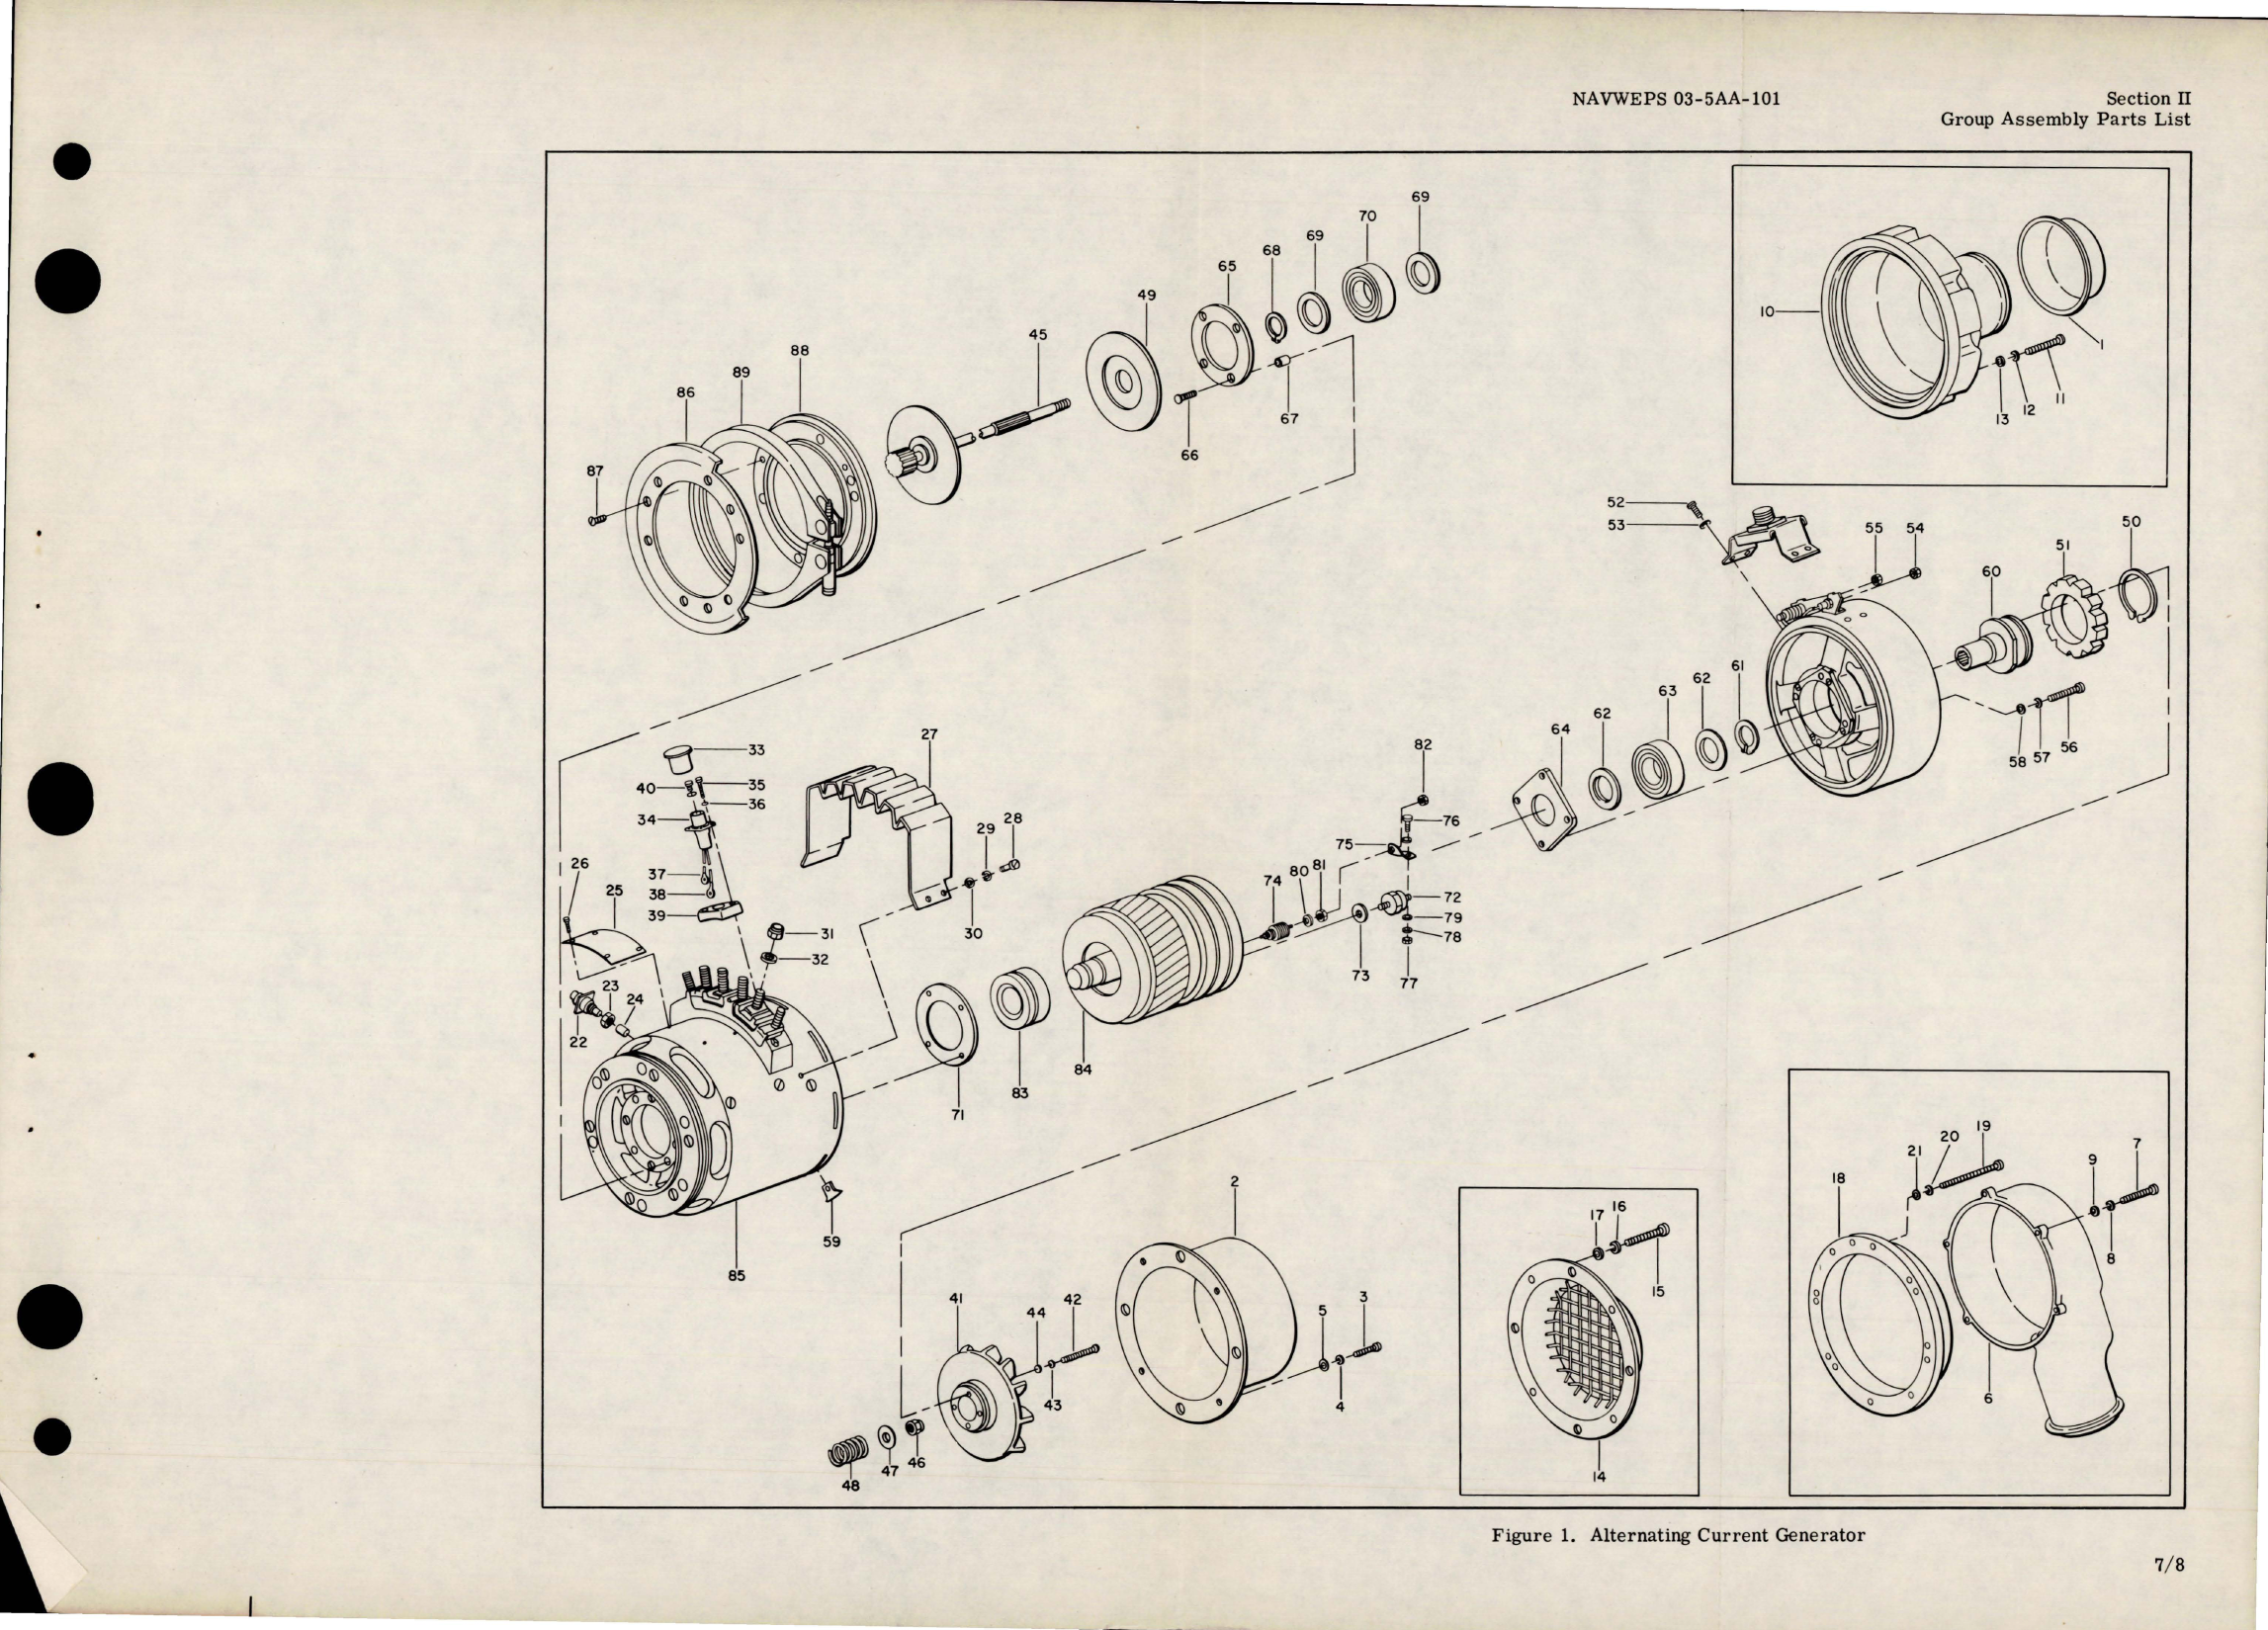 Sample page 7 from AirCorps Library document: Illustrated Parts Breakdown for Alternating Current Generator 